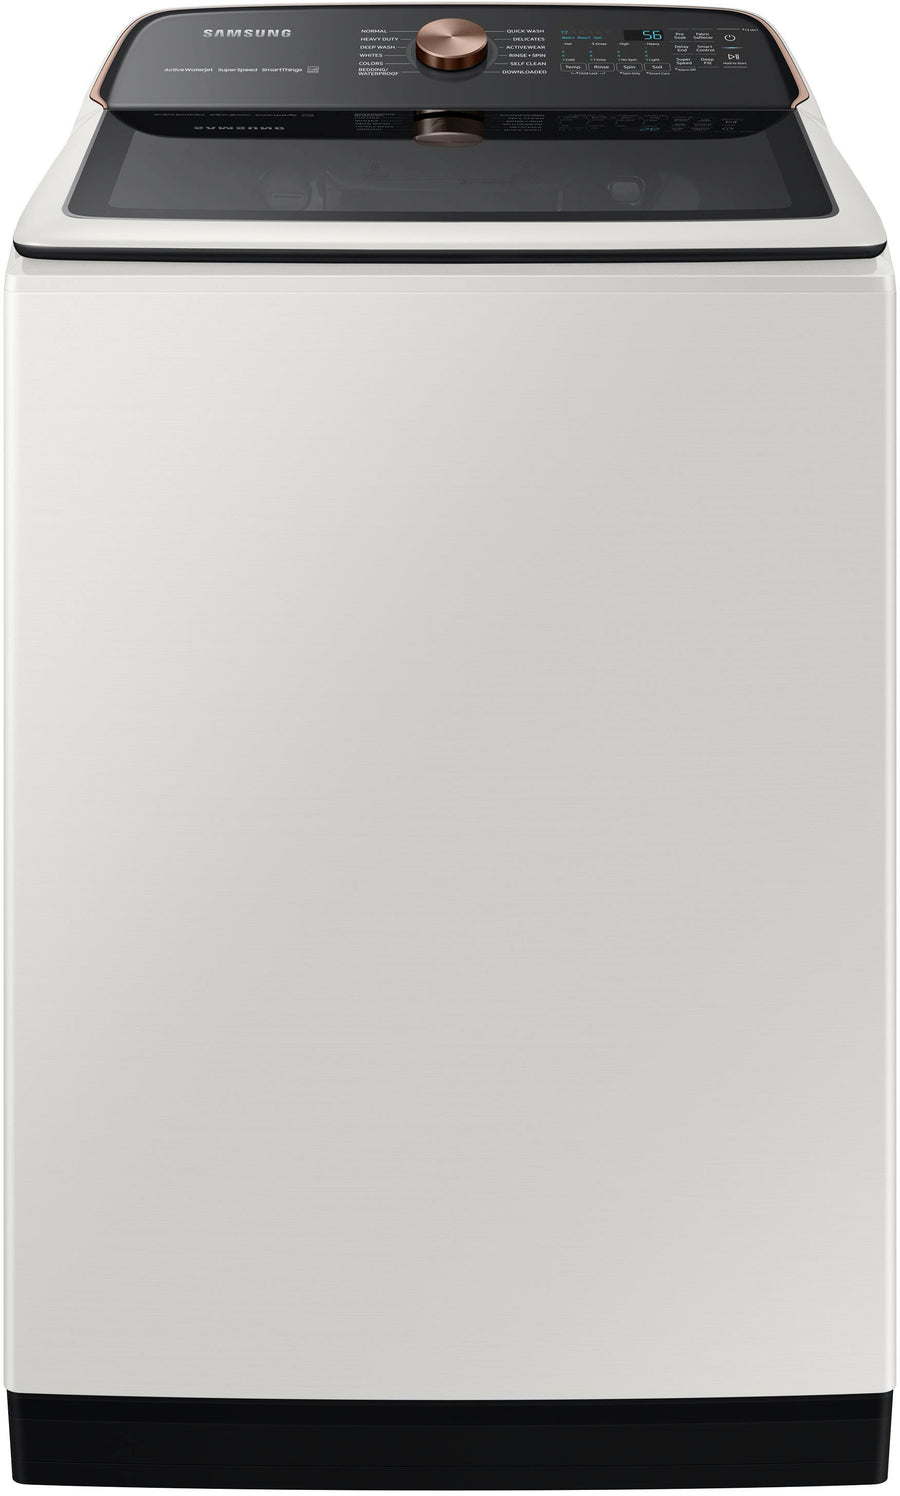 Samsung - 5.5 cu. ft. Extra-Large Capacity Smart Top Load Washer with Super Speed Wash - Ivory_0